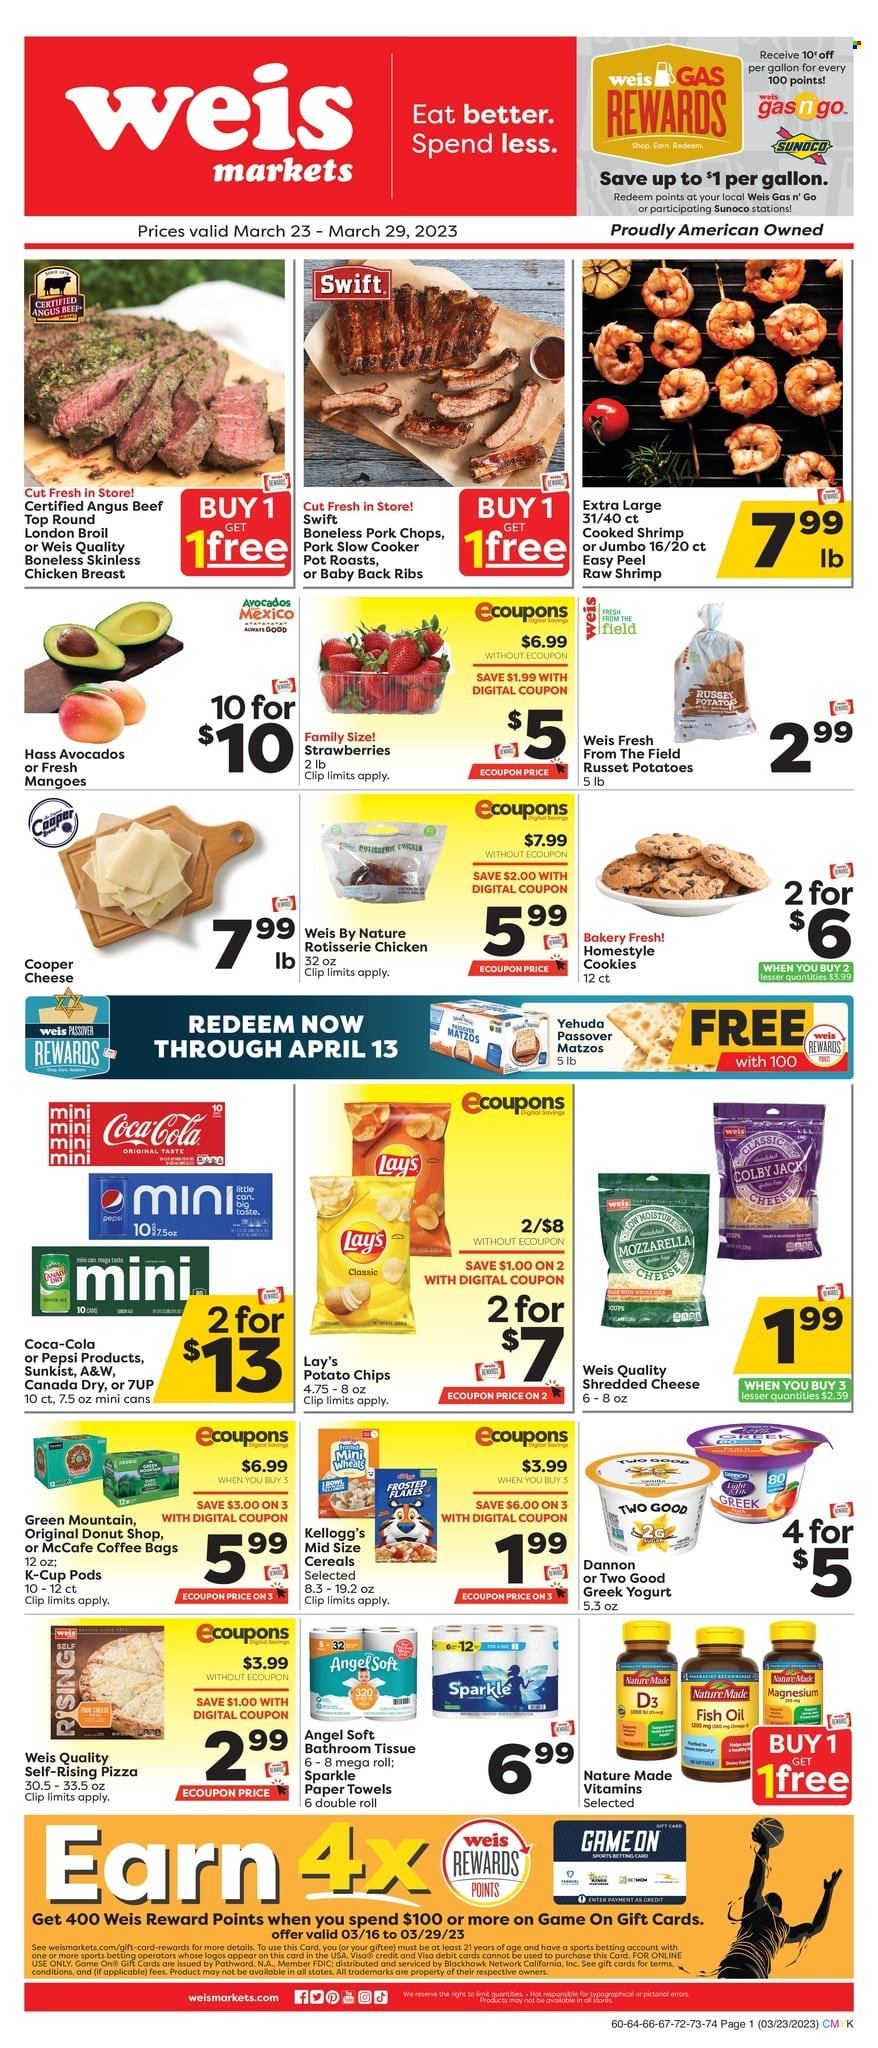 thumbnail - Weis Flyer - 03/23/2023 - 03/29/2023 - Sales products - russet potatoes, avocado, strawberries, chicken breasts, chicken, beef meat, ribs, pork chops, pork meat, pork ribs, pork back ribs, shrimps, pizza, chicken roast, Colby cheese, greek yoghurt, yoghurt, Dannon, cookies, Kellogg's, potato chips, chips, Lay’s, cereals, Canada Dry, Coca-Cola, Pepsi, 7UP, A&W, coffee, coffee capsules, McCafe, K-Cups, Green Mountain, bath tissue, kitchen towels, paper towels, pot, fish oil, magnesium, Nature Made, vitamin D3. Page 1.